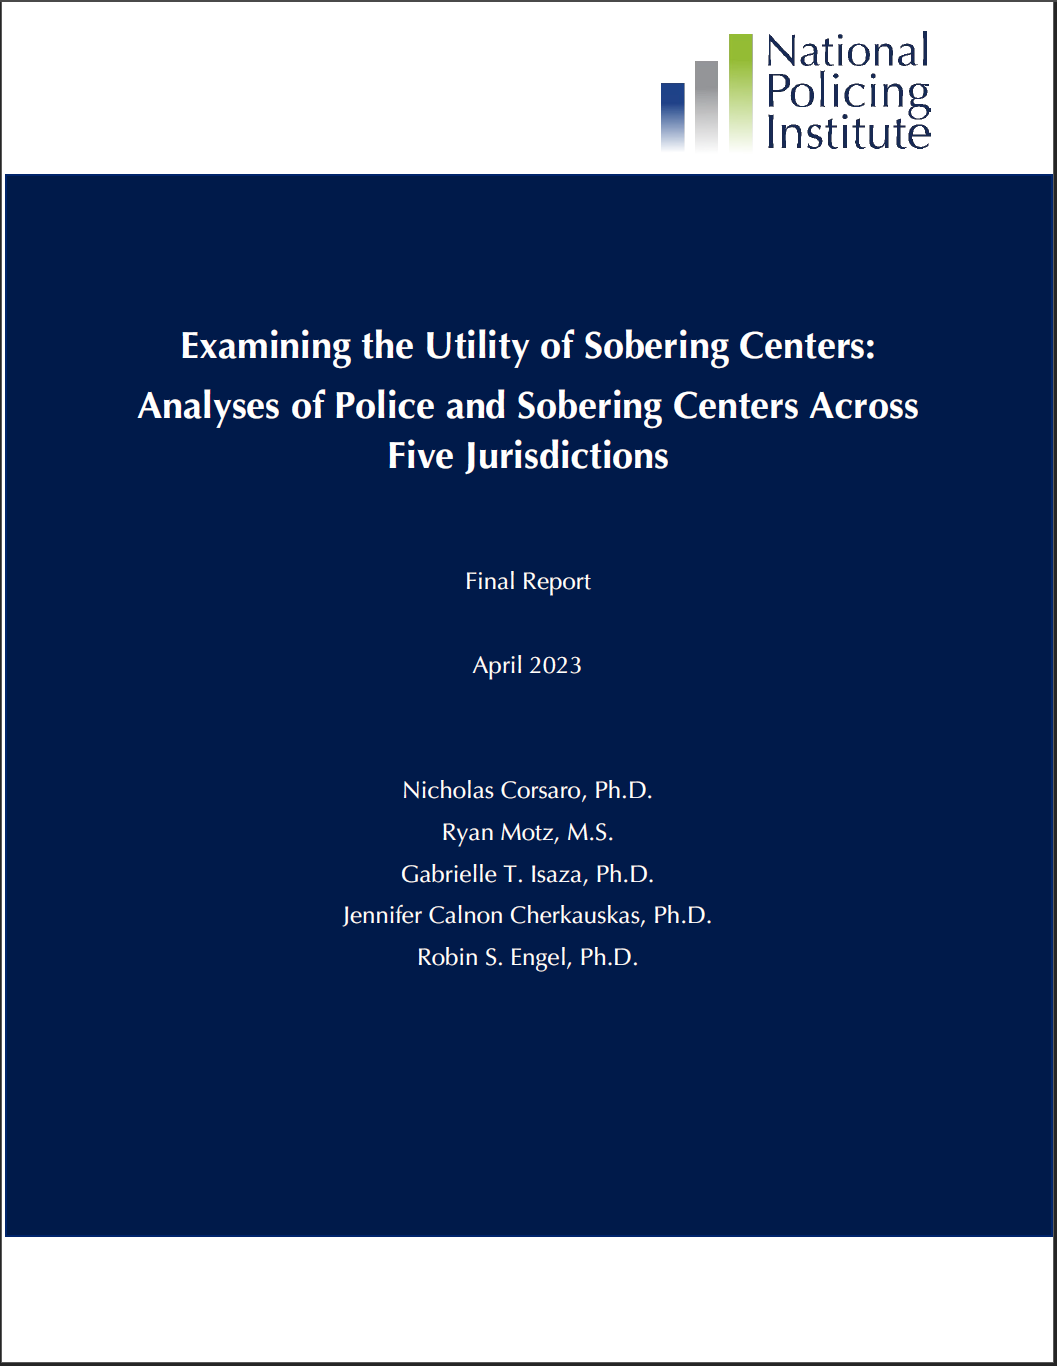 Evaluating Utility of soberting centers-analyses final report cover